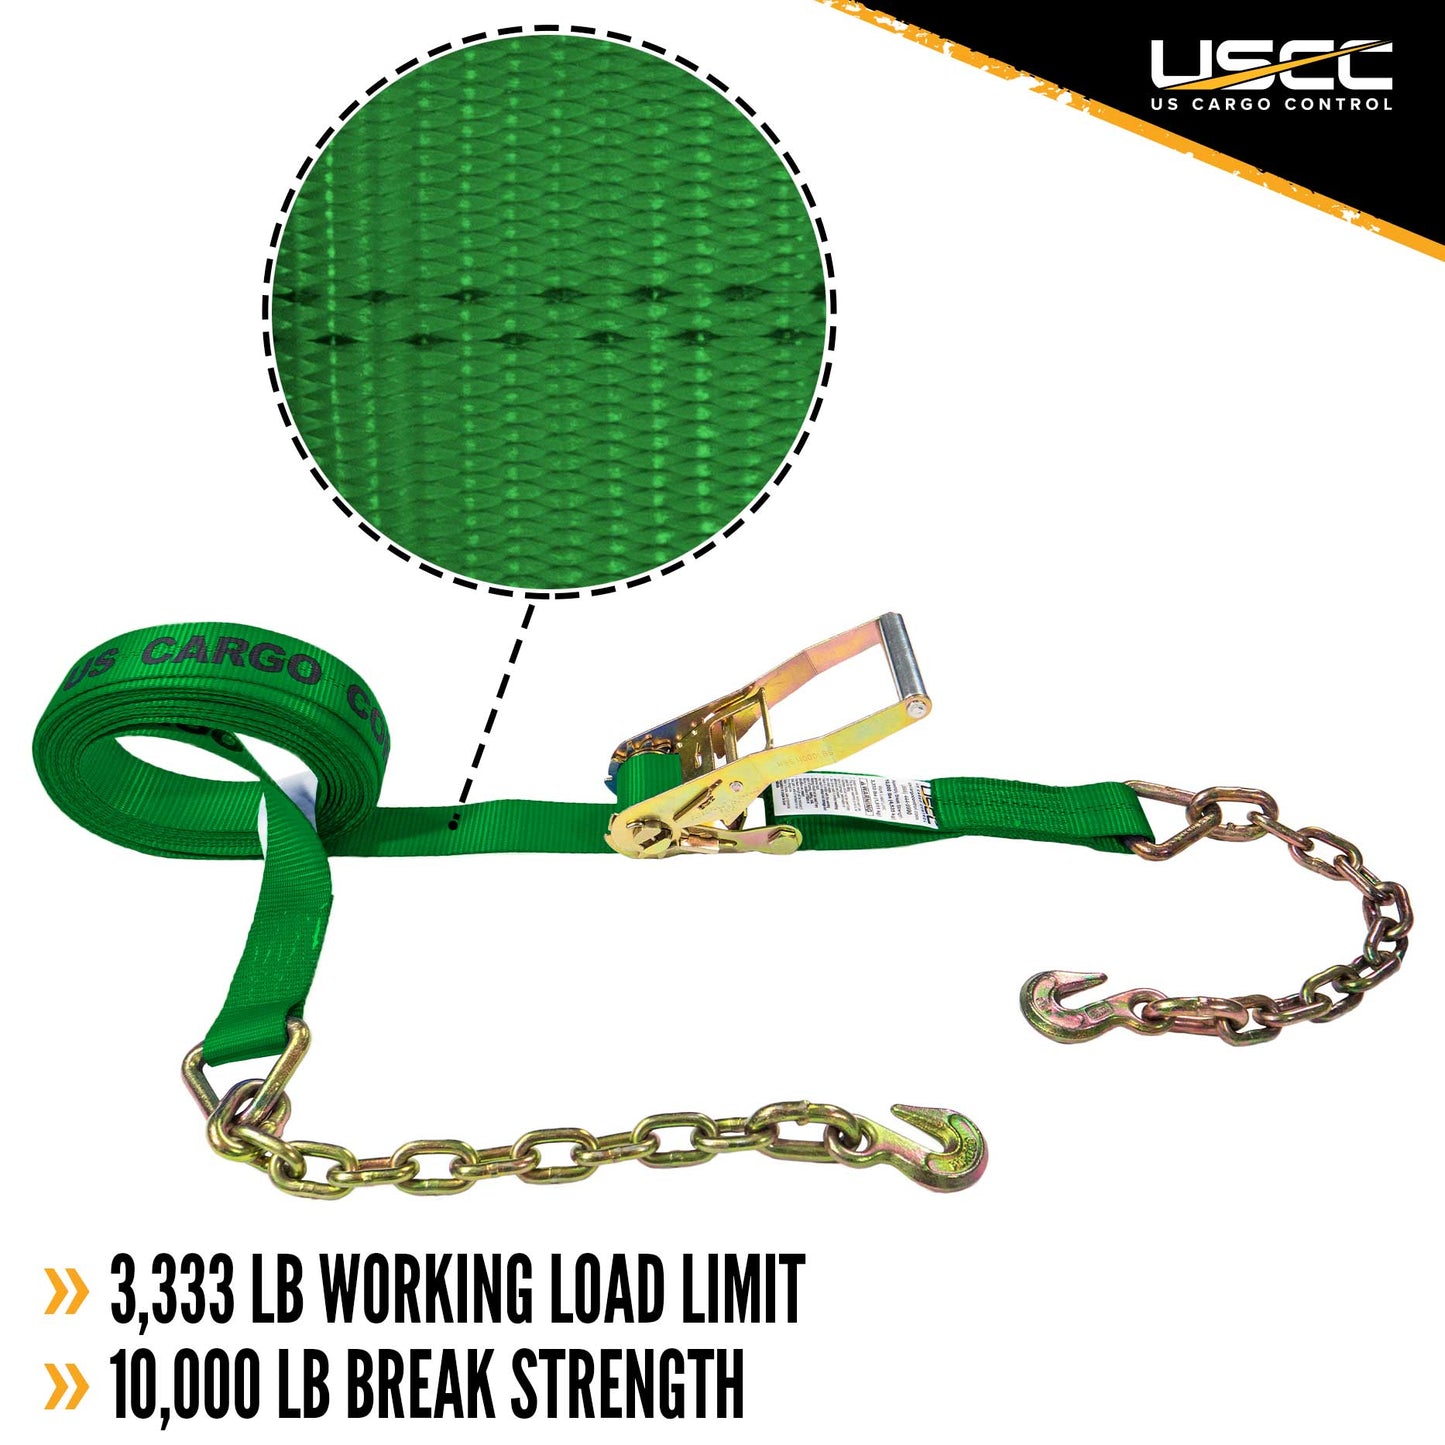 2" x 27' Green Ratchet Strap w/ Chain Extension